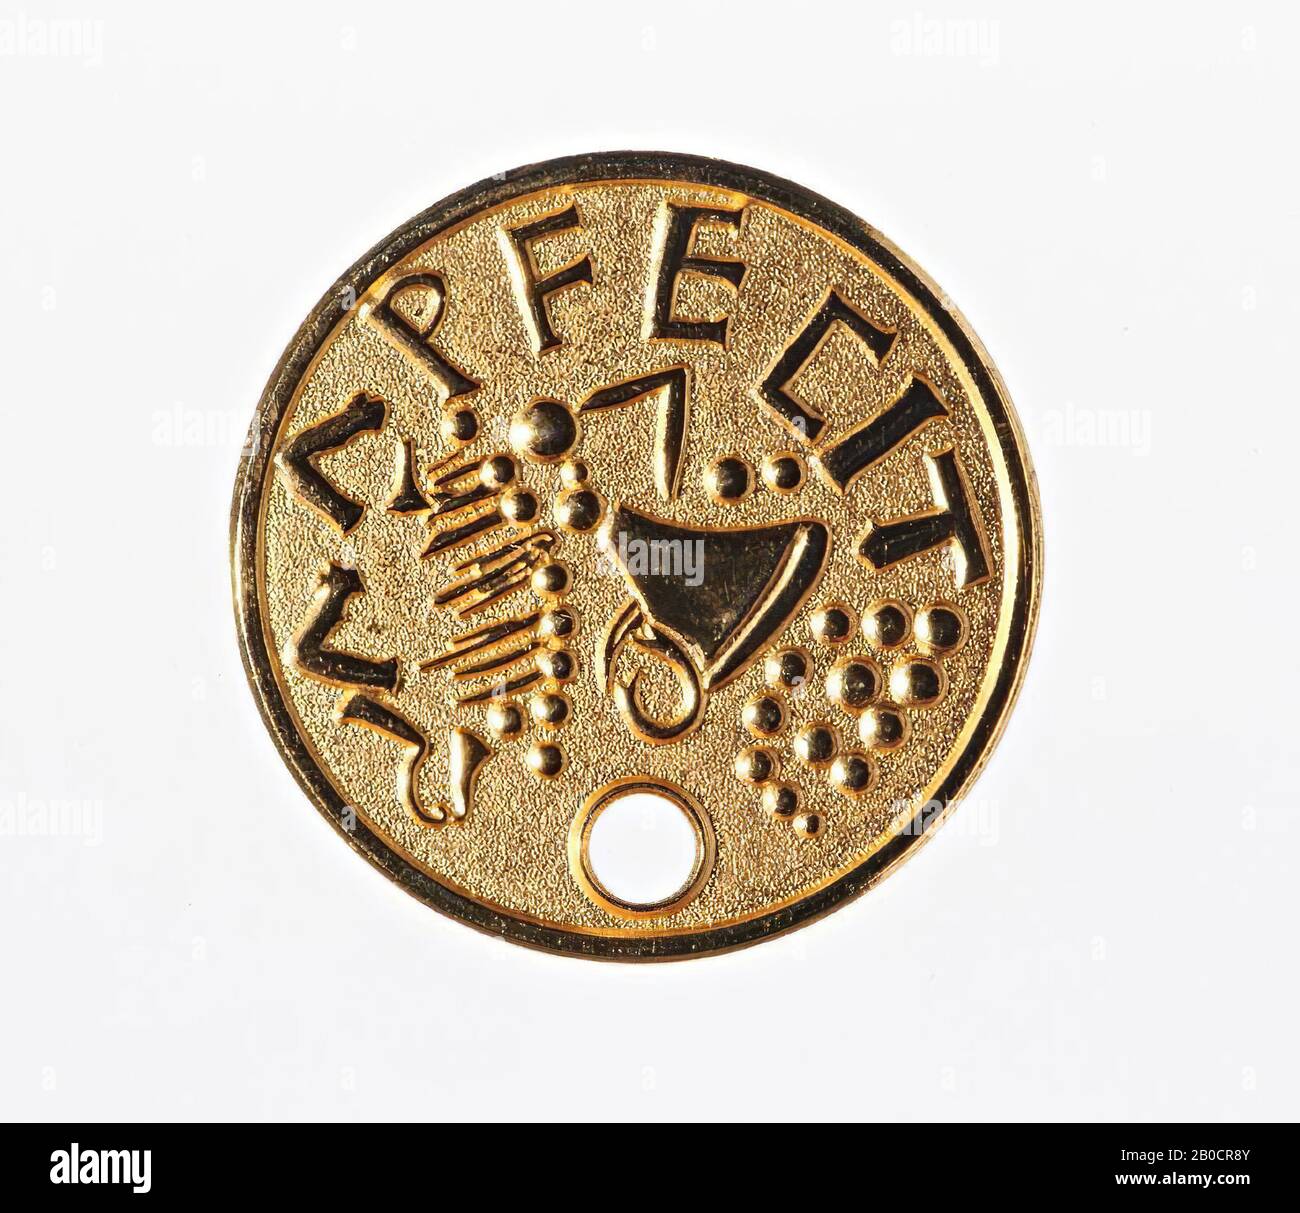 Key ring with an imitation coin from the Archaeological Consultancy RAAP, www.raap.nl, RAAP FECIT, keychain, metal, aluminum ?, Length: 8 cm, modern 2012 Stock Photo